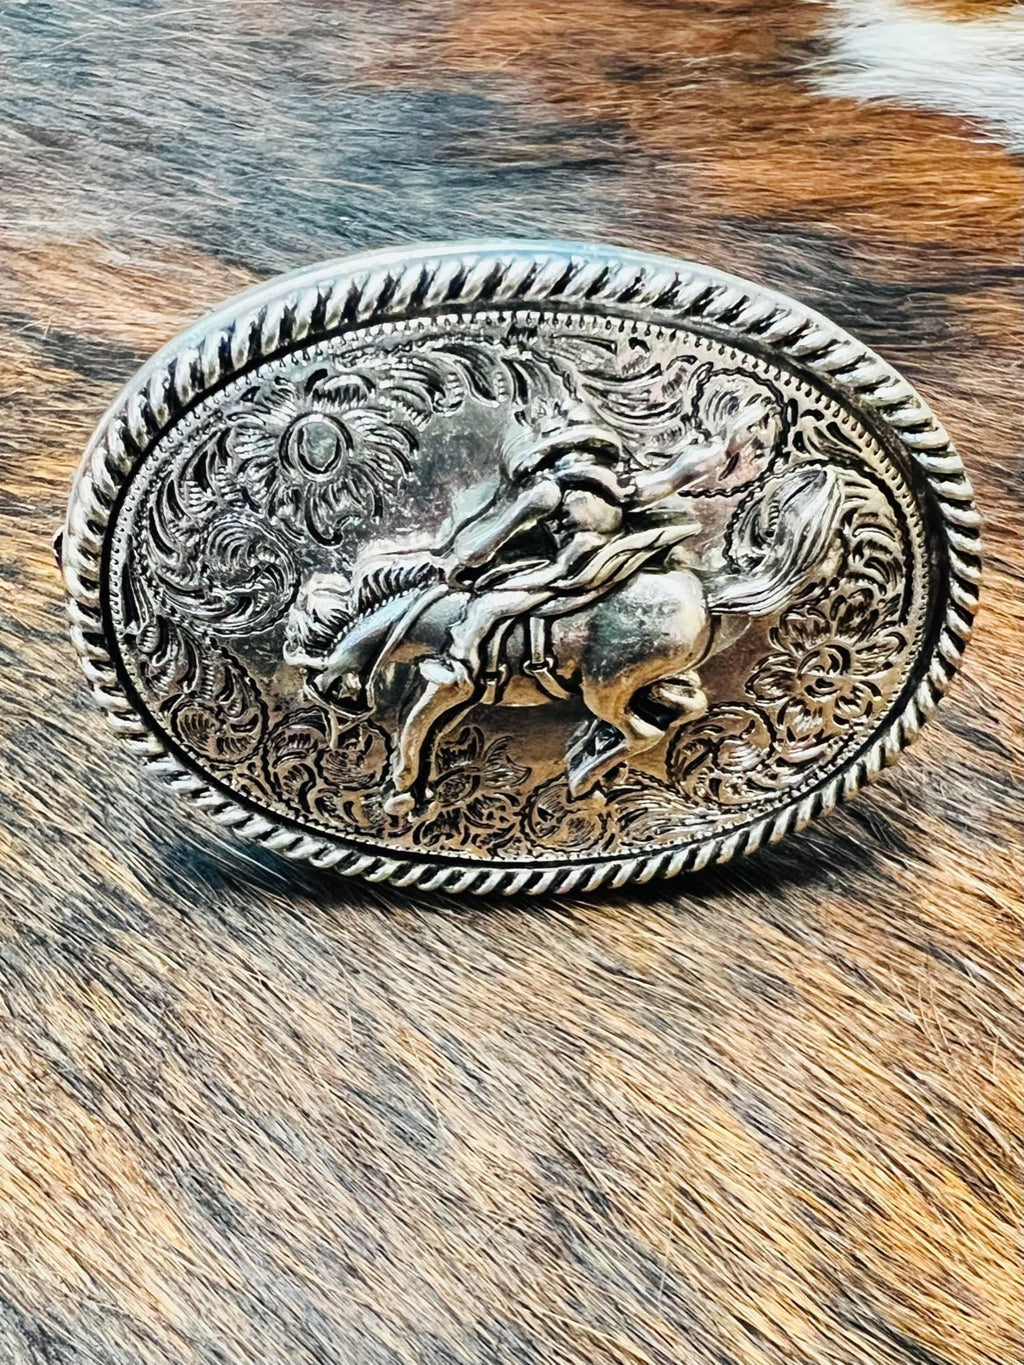 This Belt Buckle Pop Socket is a high-shine showstopper! You don't need to be a cowboy to rock this western concho style cell phone grip--just an eye for style. Featuring an oval shape, bucking horse with rider, and horse belt buckle design, you'll be ready to ride in style while securely holding your mobile device. Wowza, partner! 2 1/2"W X 1 3/4H.